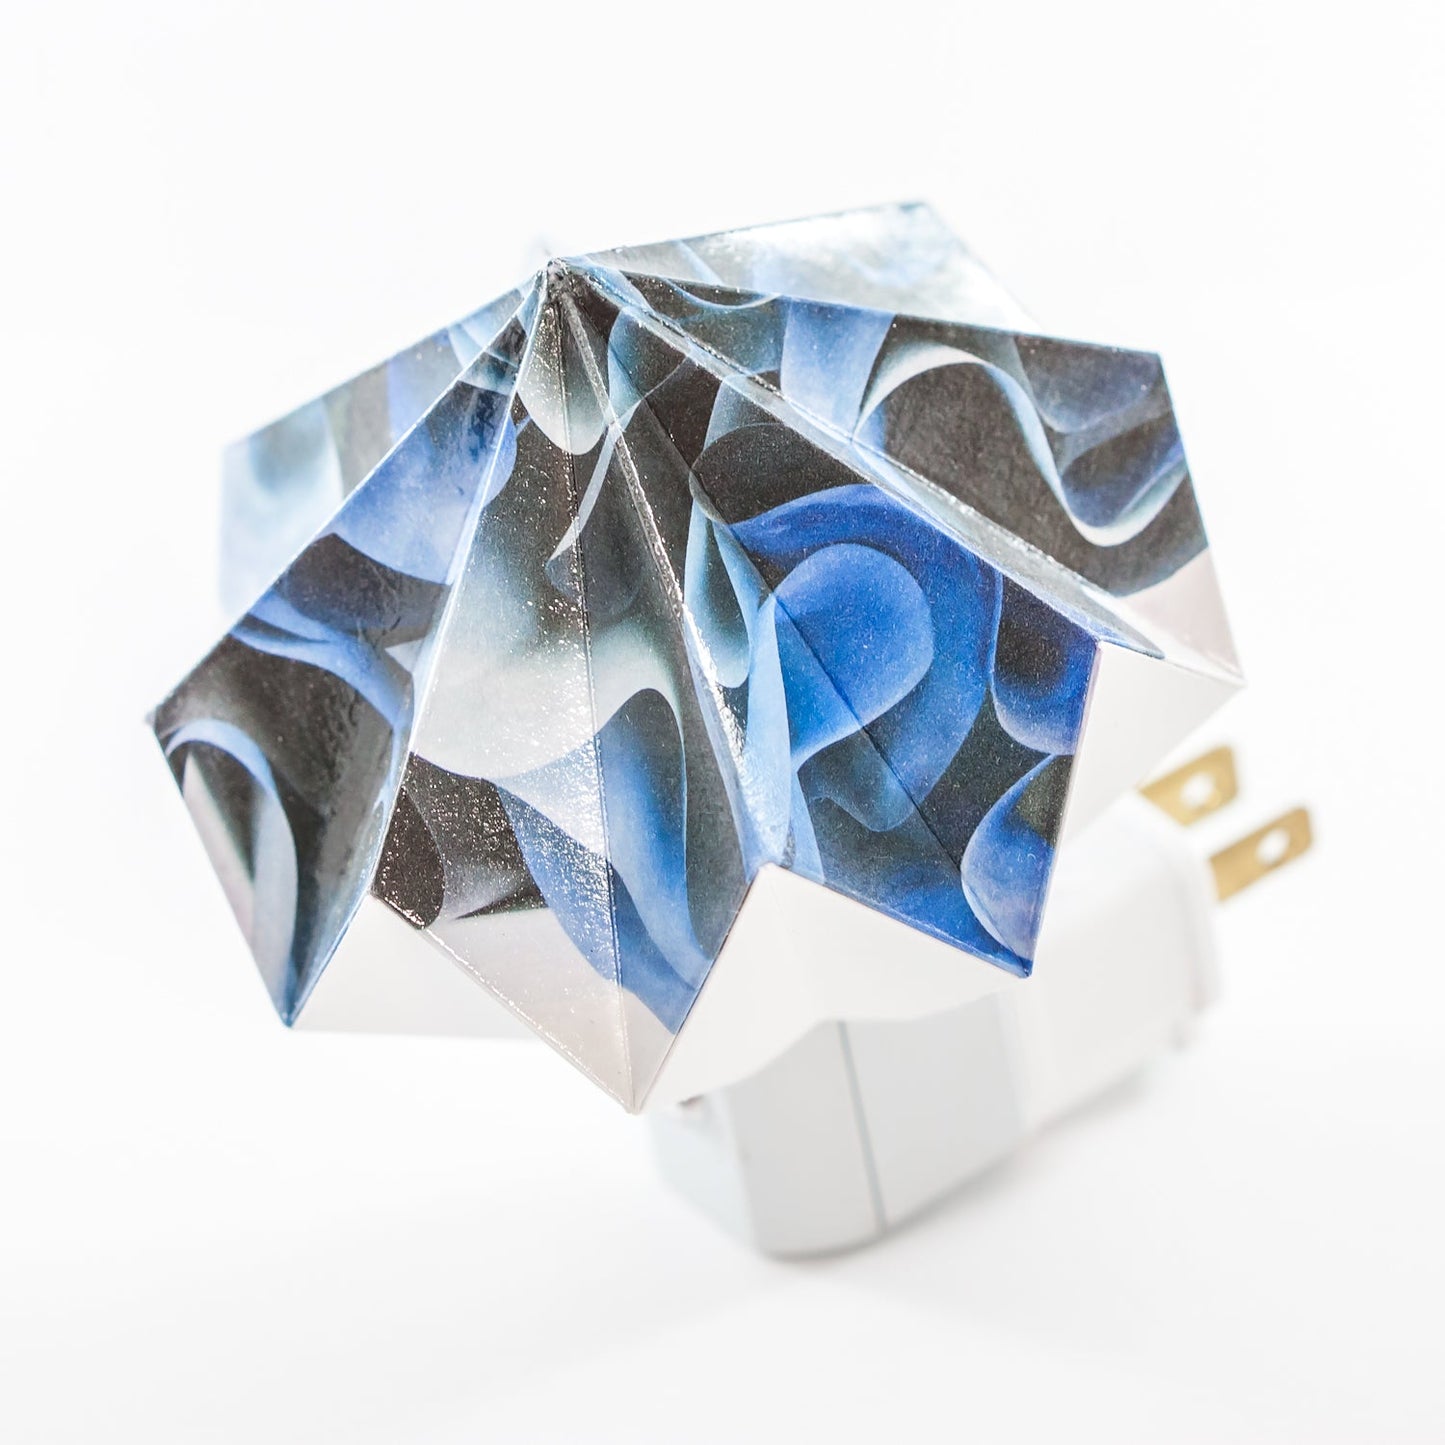 Origami Night Light: Segregation Of Smoke By Artist Lisa Marie Sipe in collaboration with LeeMo Designs in Bend, Oregon